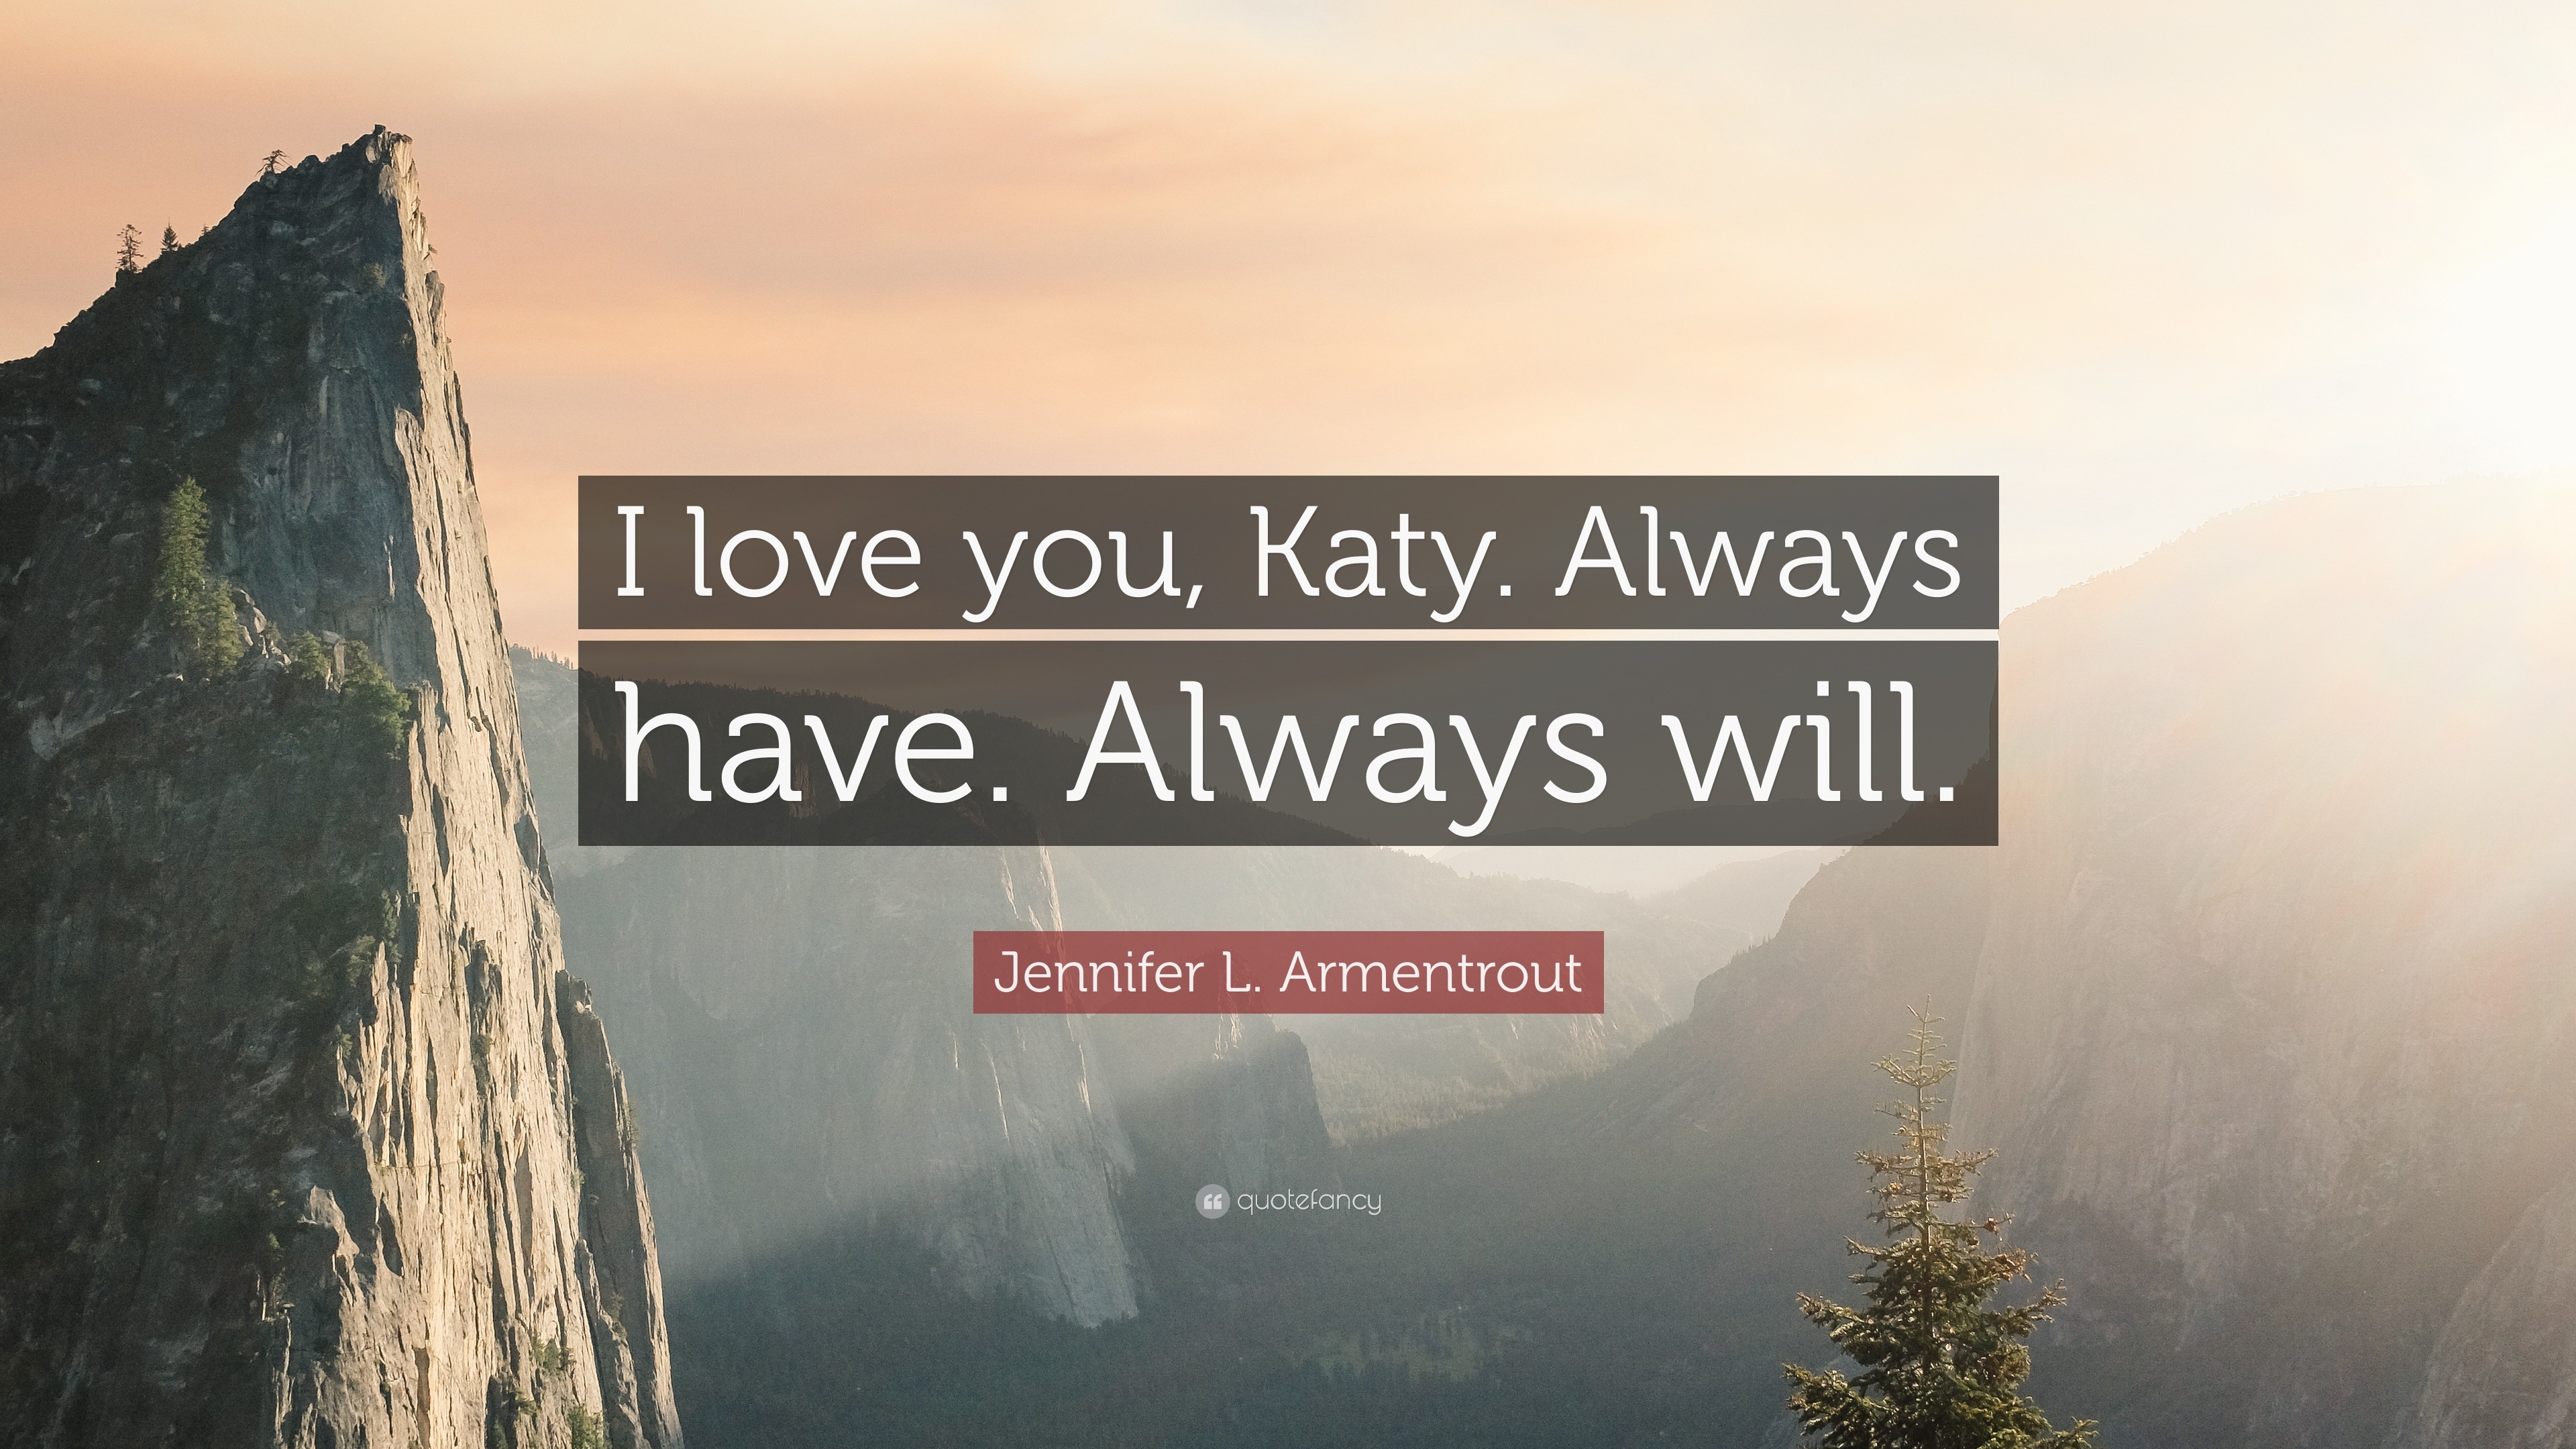 Jennifer L Armentrout Quote “I love you Katy Always have